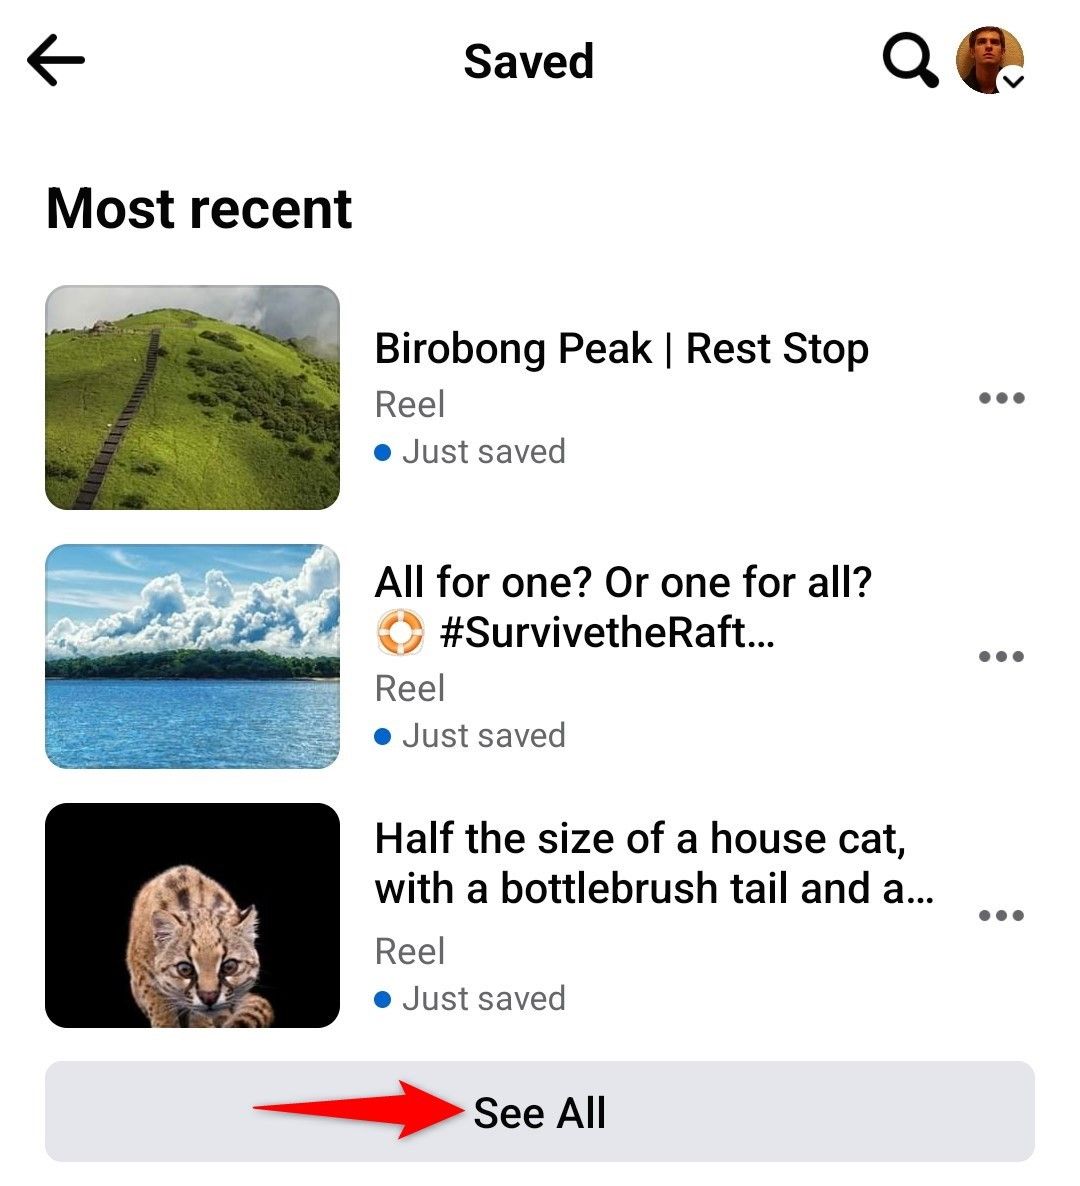 'See All' highlighted on Facebook mobile app's 'Saved' screen.